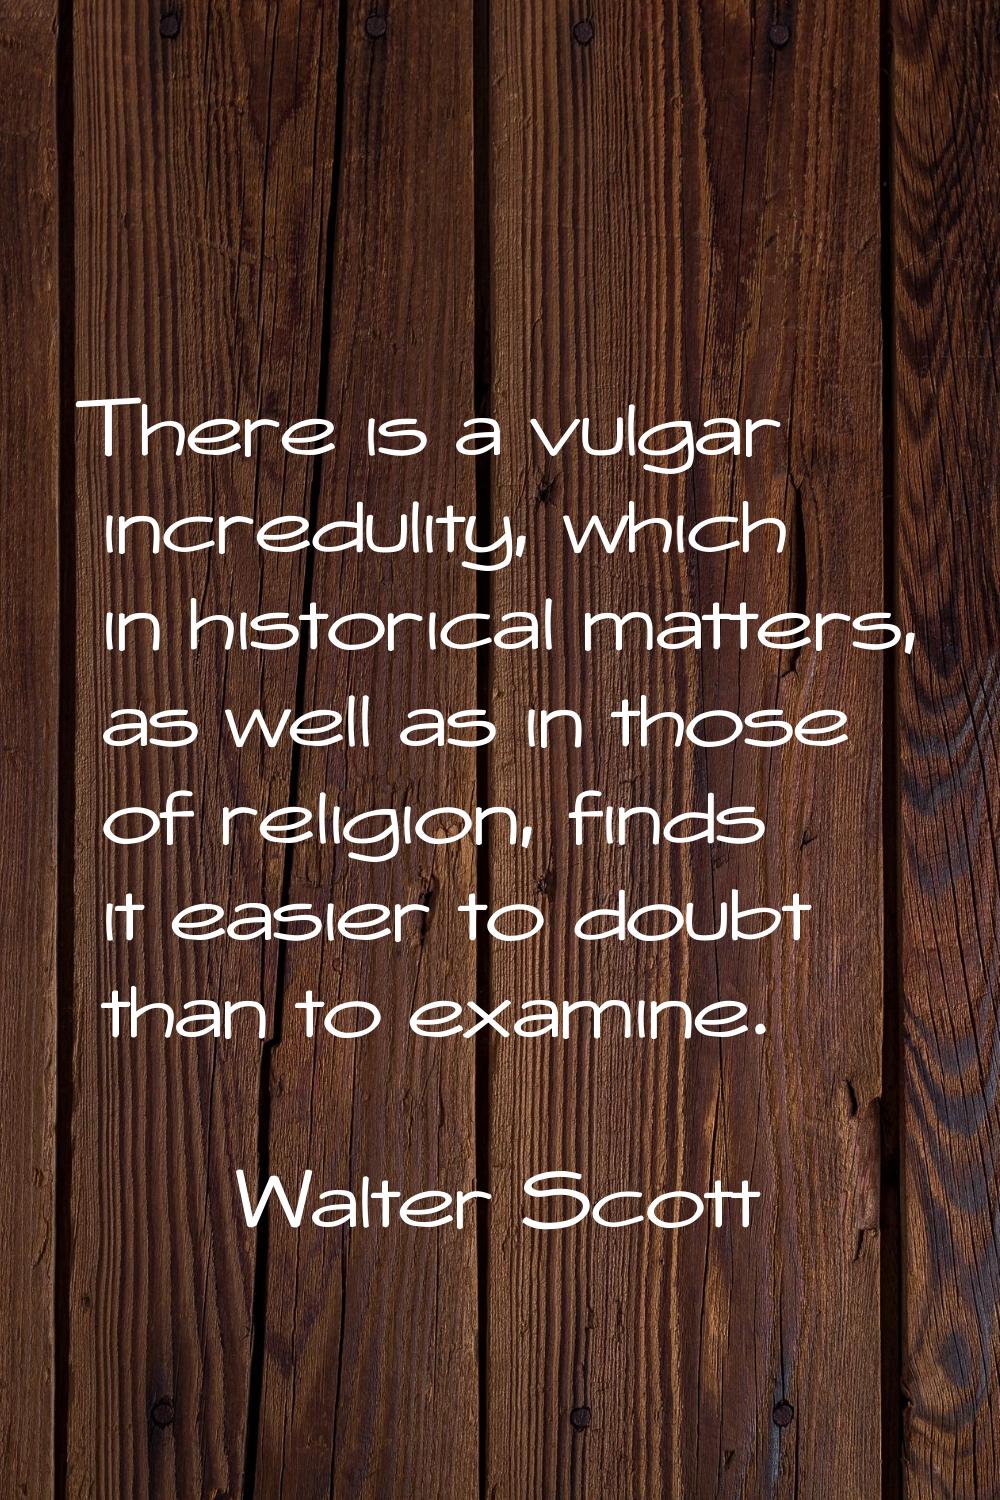 There is a vulgar incredulity, which in historical matters, as well as in those of religion, finds 